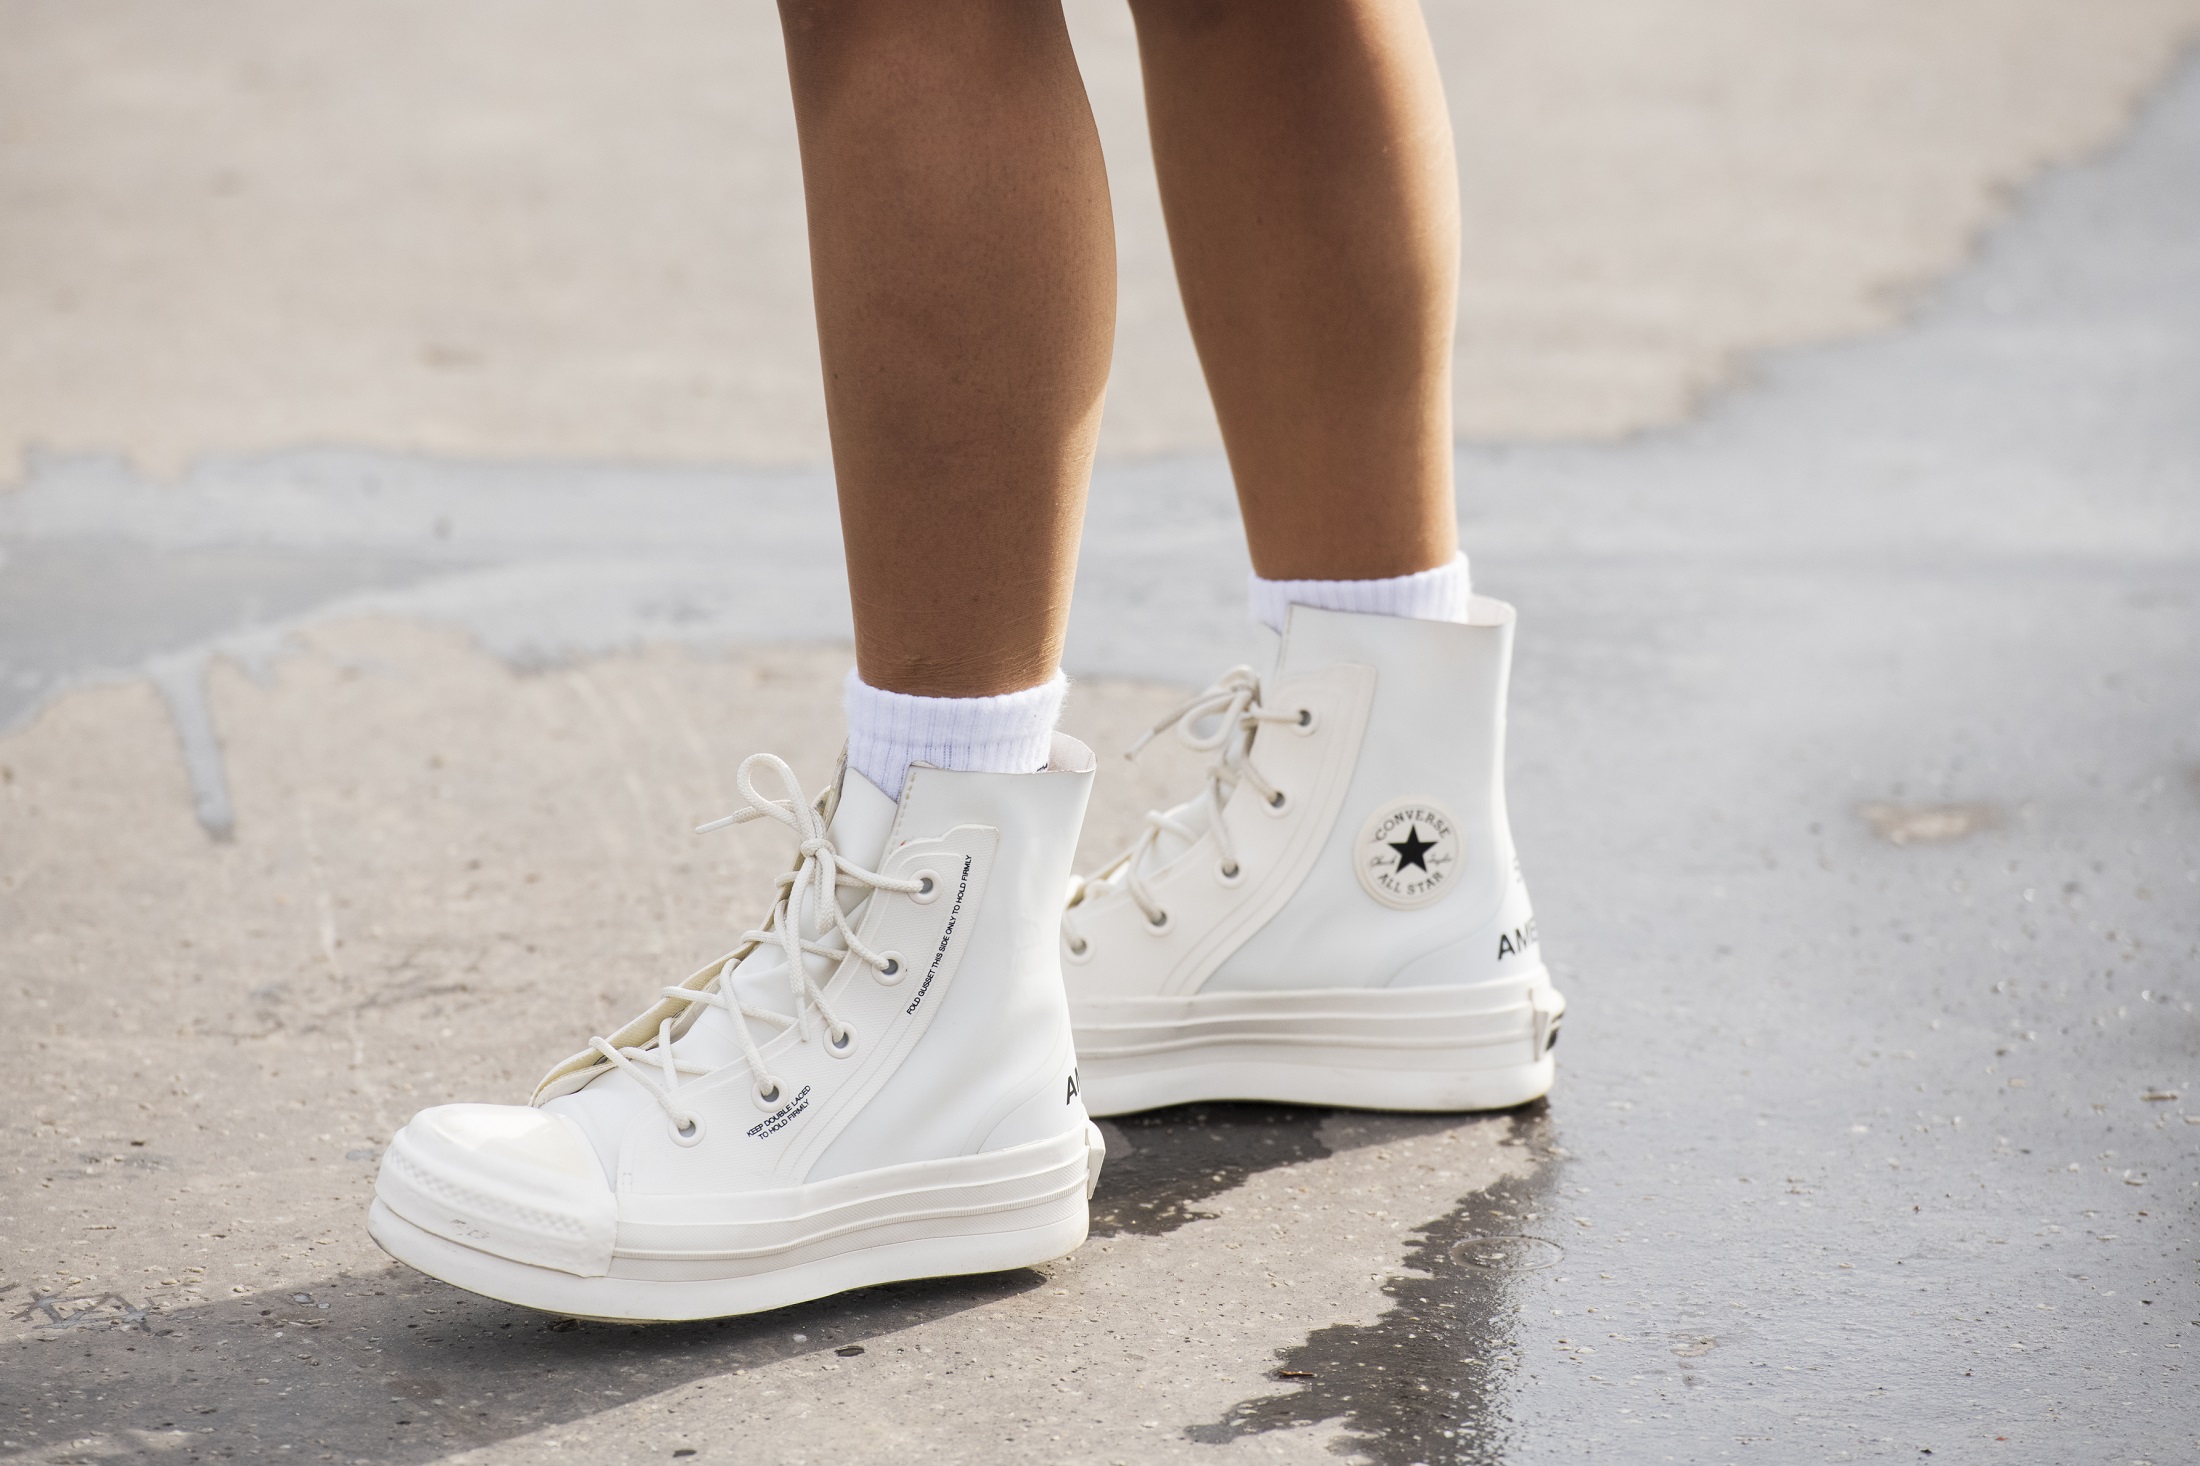 How should you take care of white sneakers and can you save the ones that have already yellowed?